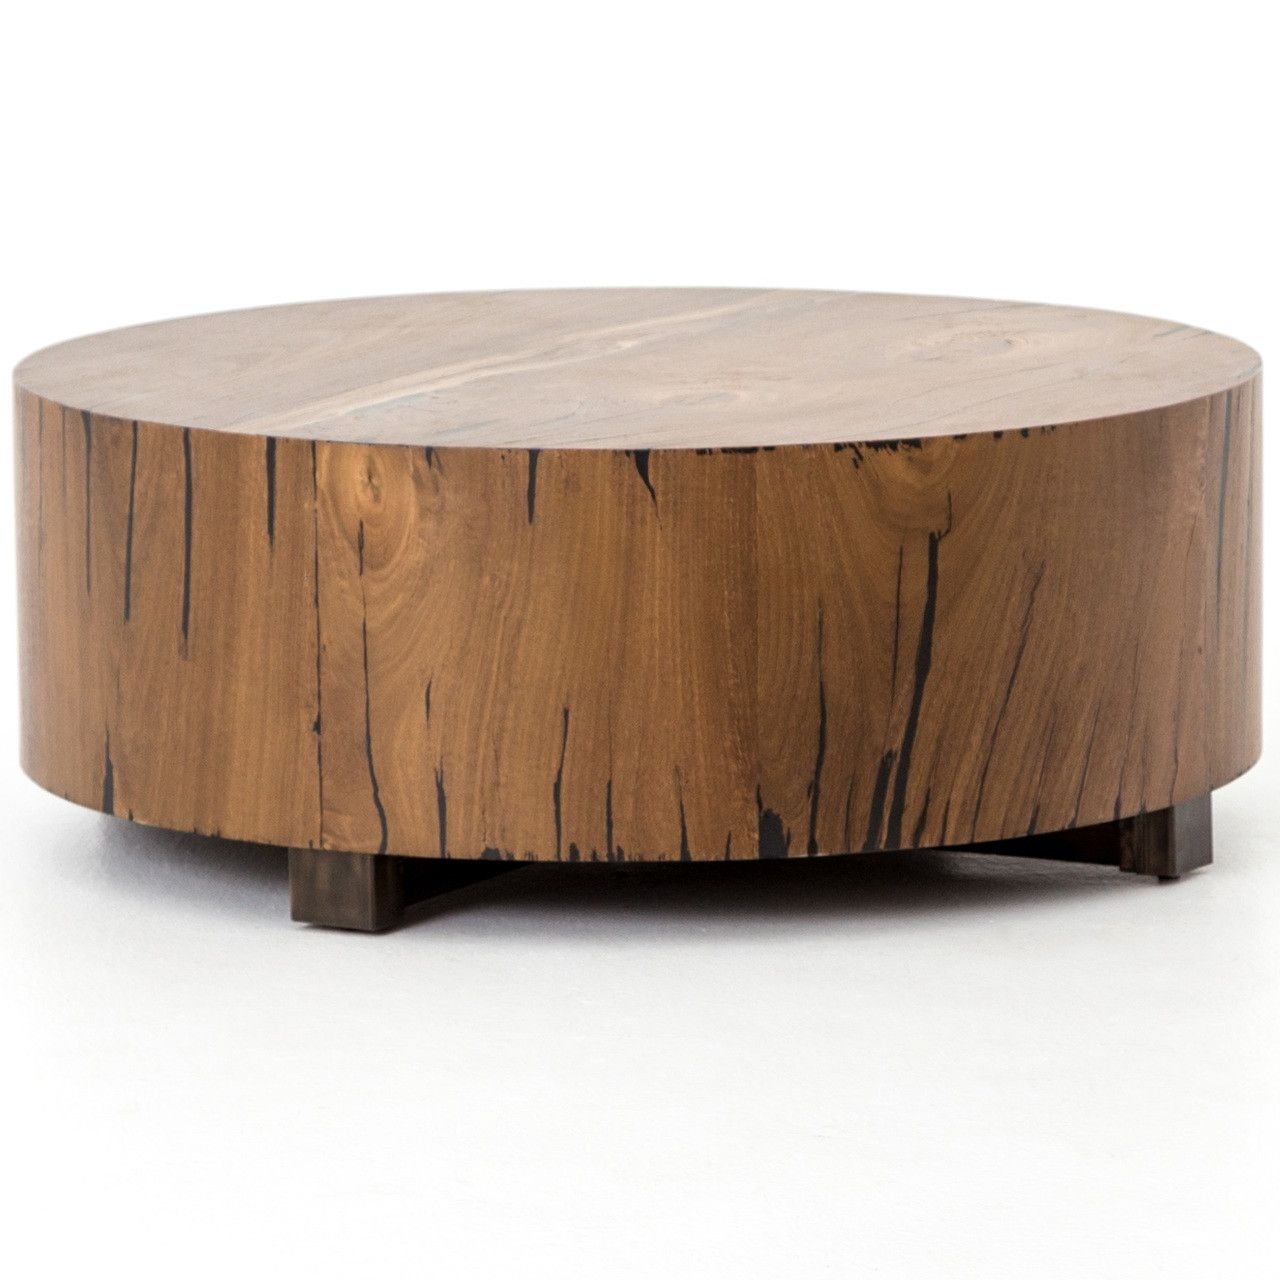 Hudson Round Natural Yukas Wood Block Coffee Table | Zin Home Throughout Coffee Tables With Round Wooden Tops (View 5 of 20)